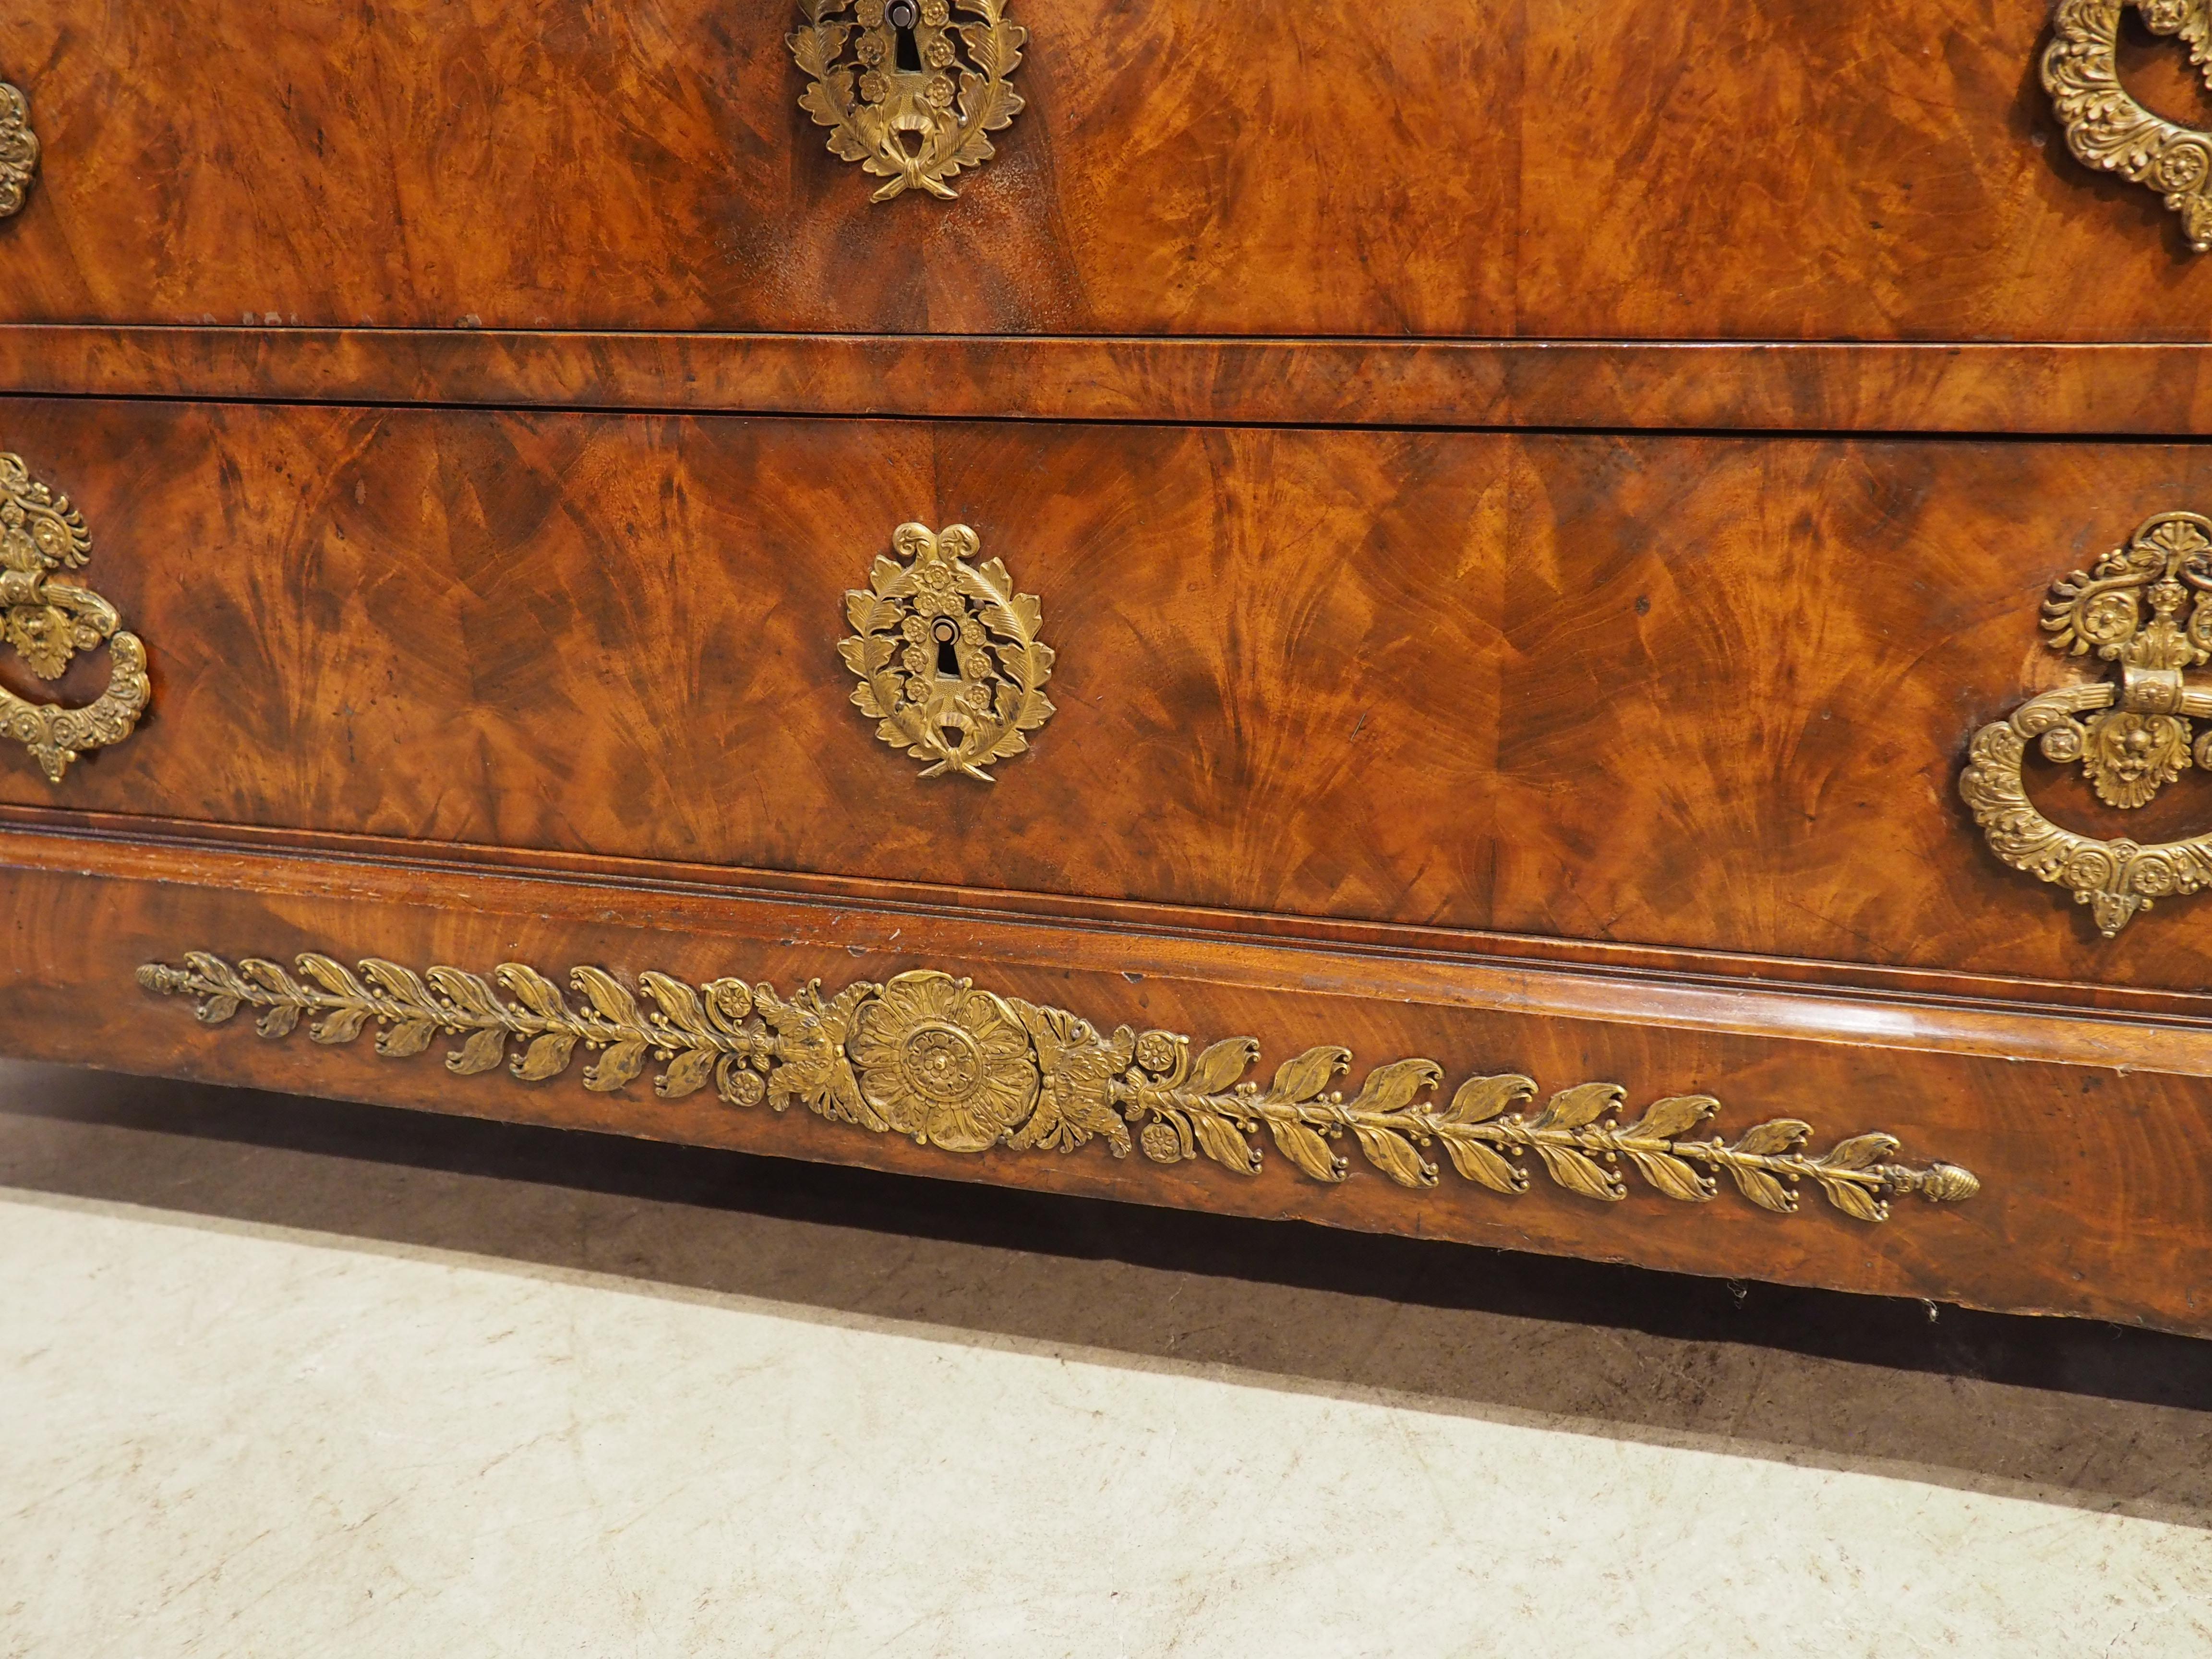 Circa 1820 French Restauration Commode in Flame Mahogany, Gilt Bronze Hardware In Good Condition For Sale In Dallas, TX